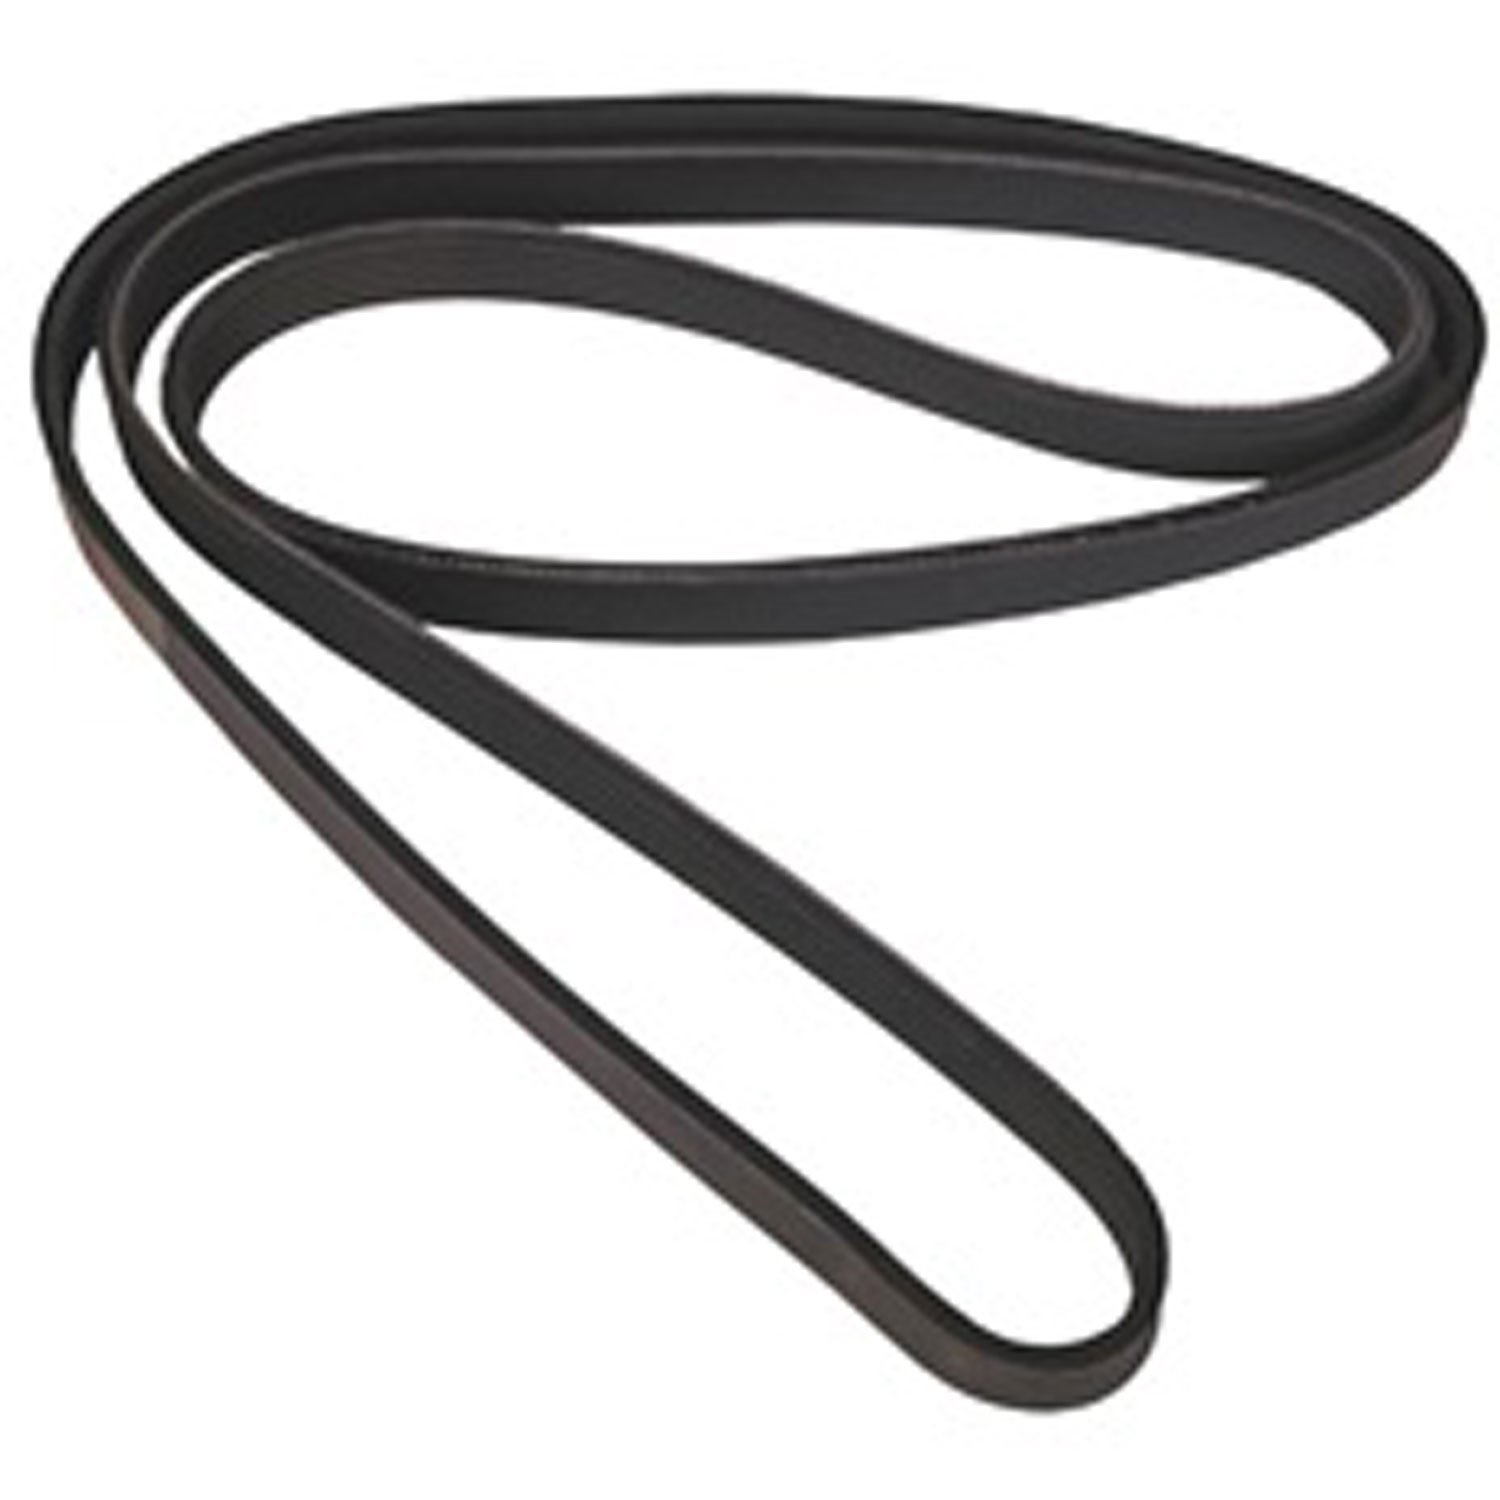 Stock replacement serpentine belt from Omix-ADA, Fits 91-93 Jeep Wrangler YJ and 94-96 Jeep Grand Cherokee ZJ